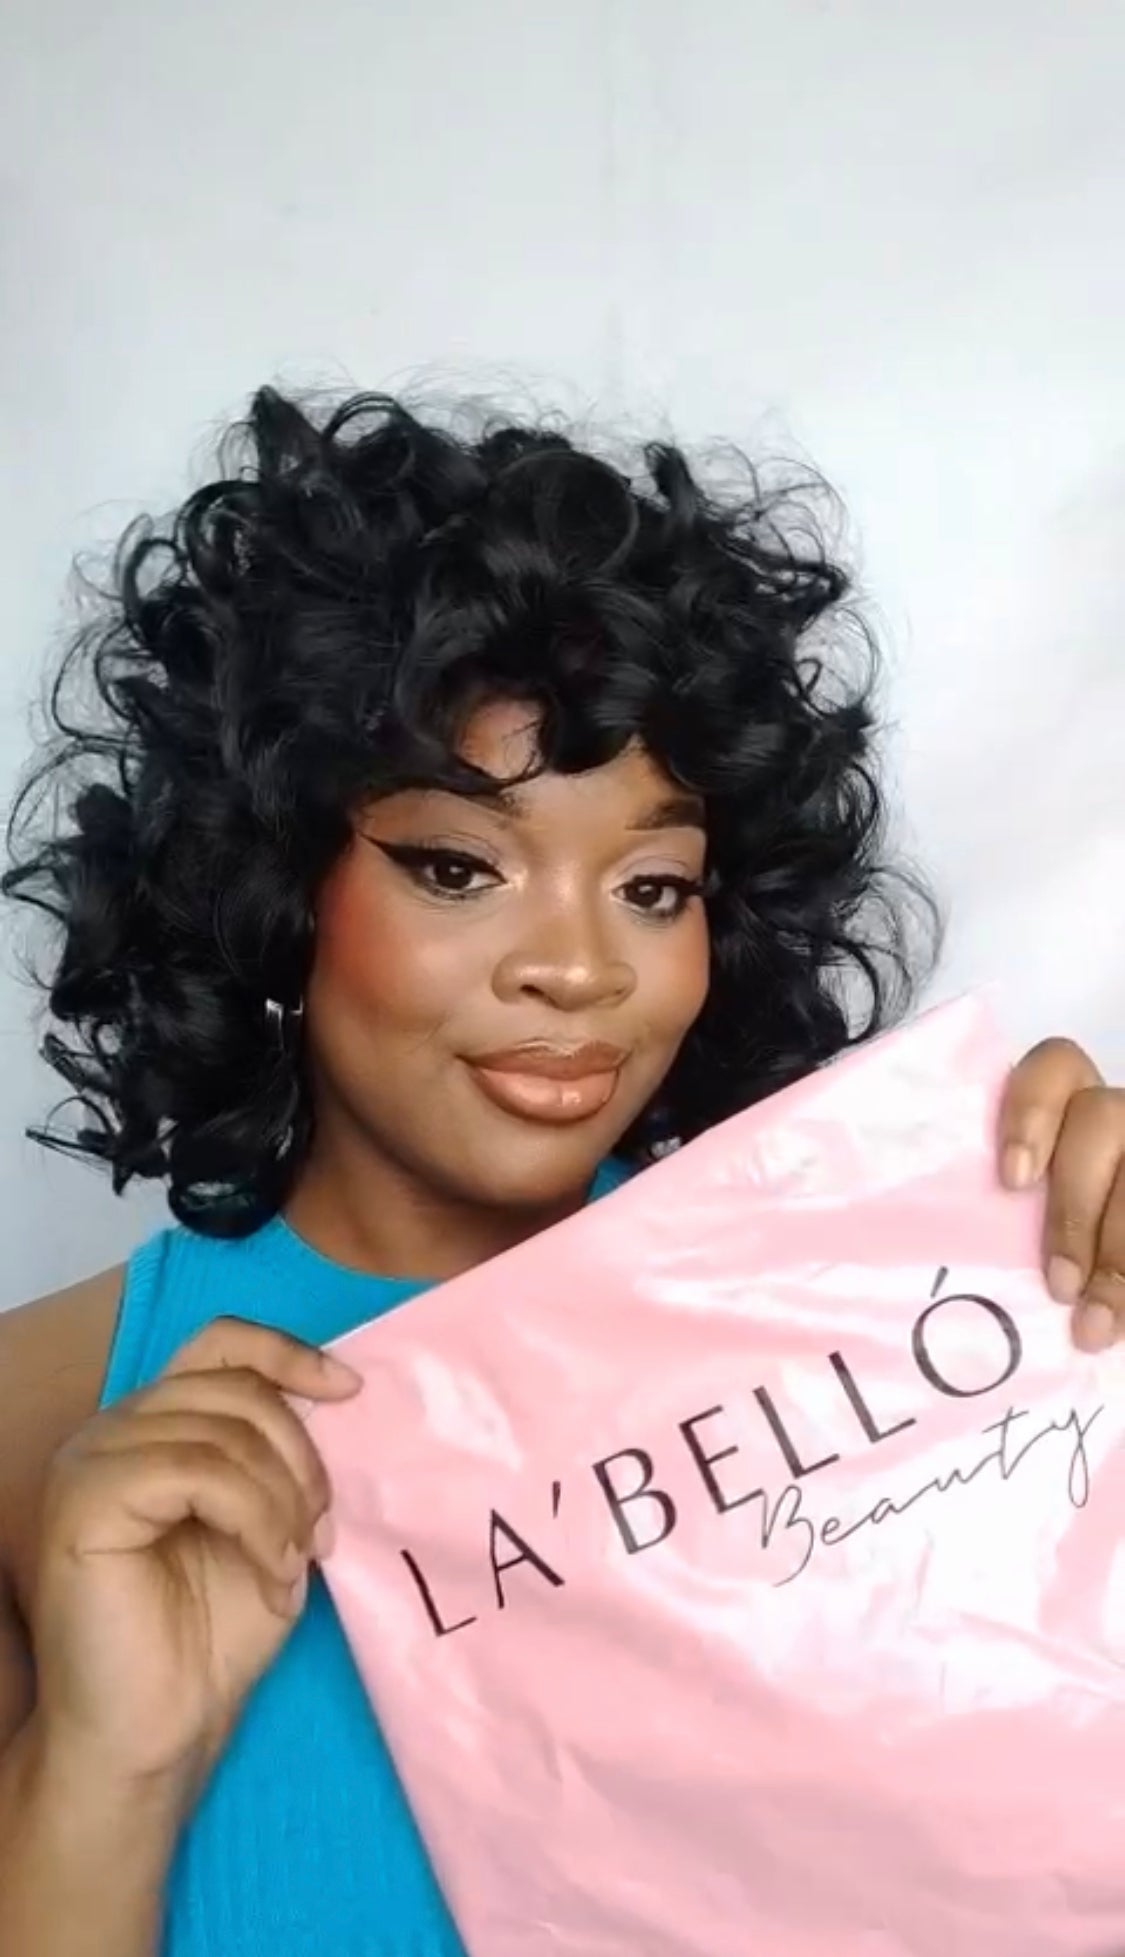 Labello beauty Wig Application and Installation: A Step-by-Step Guide